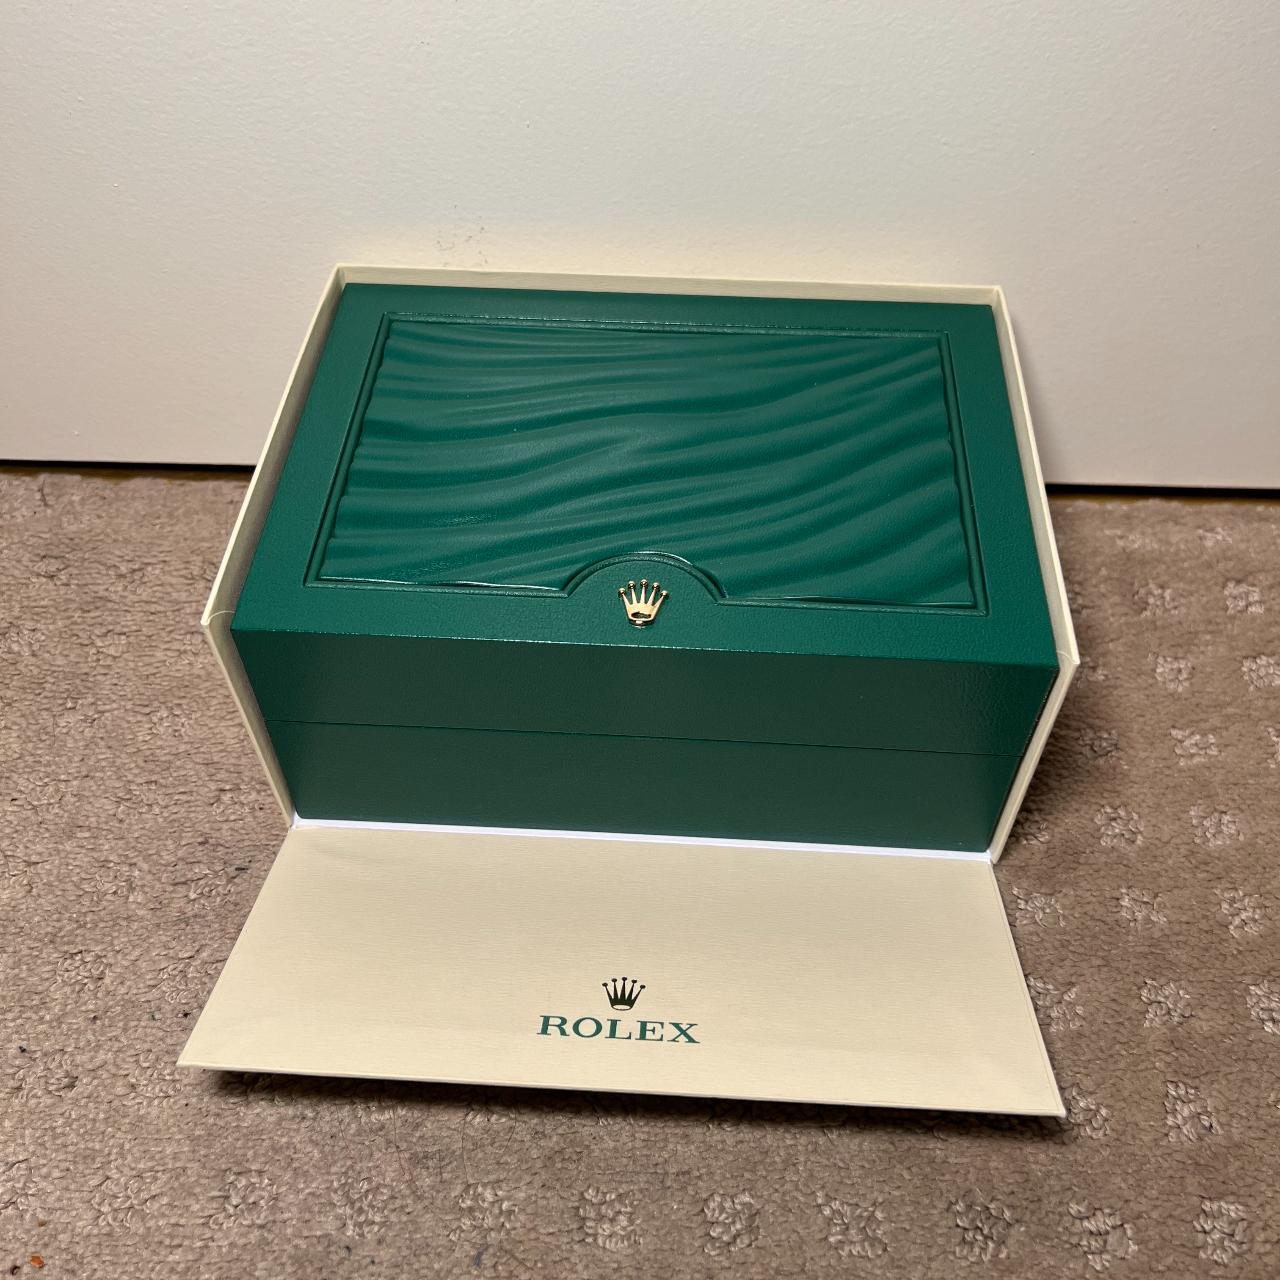 Rolex Men's Green and Gold Watch